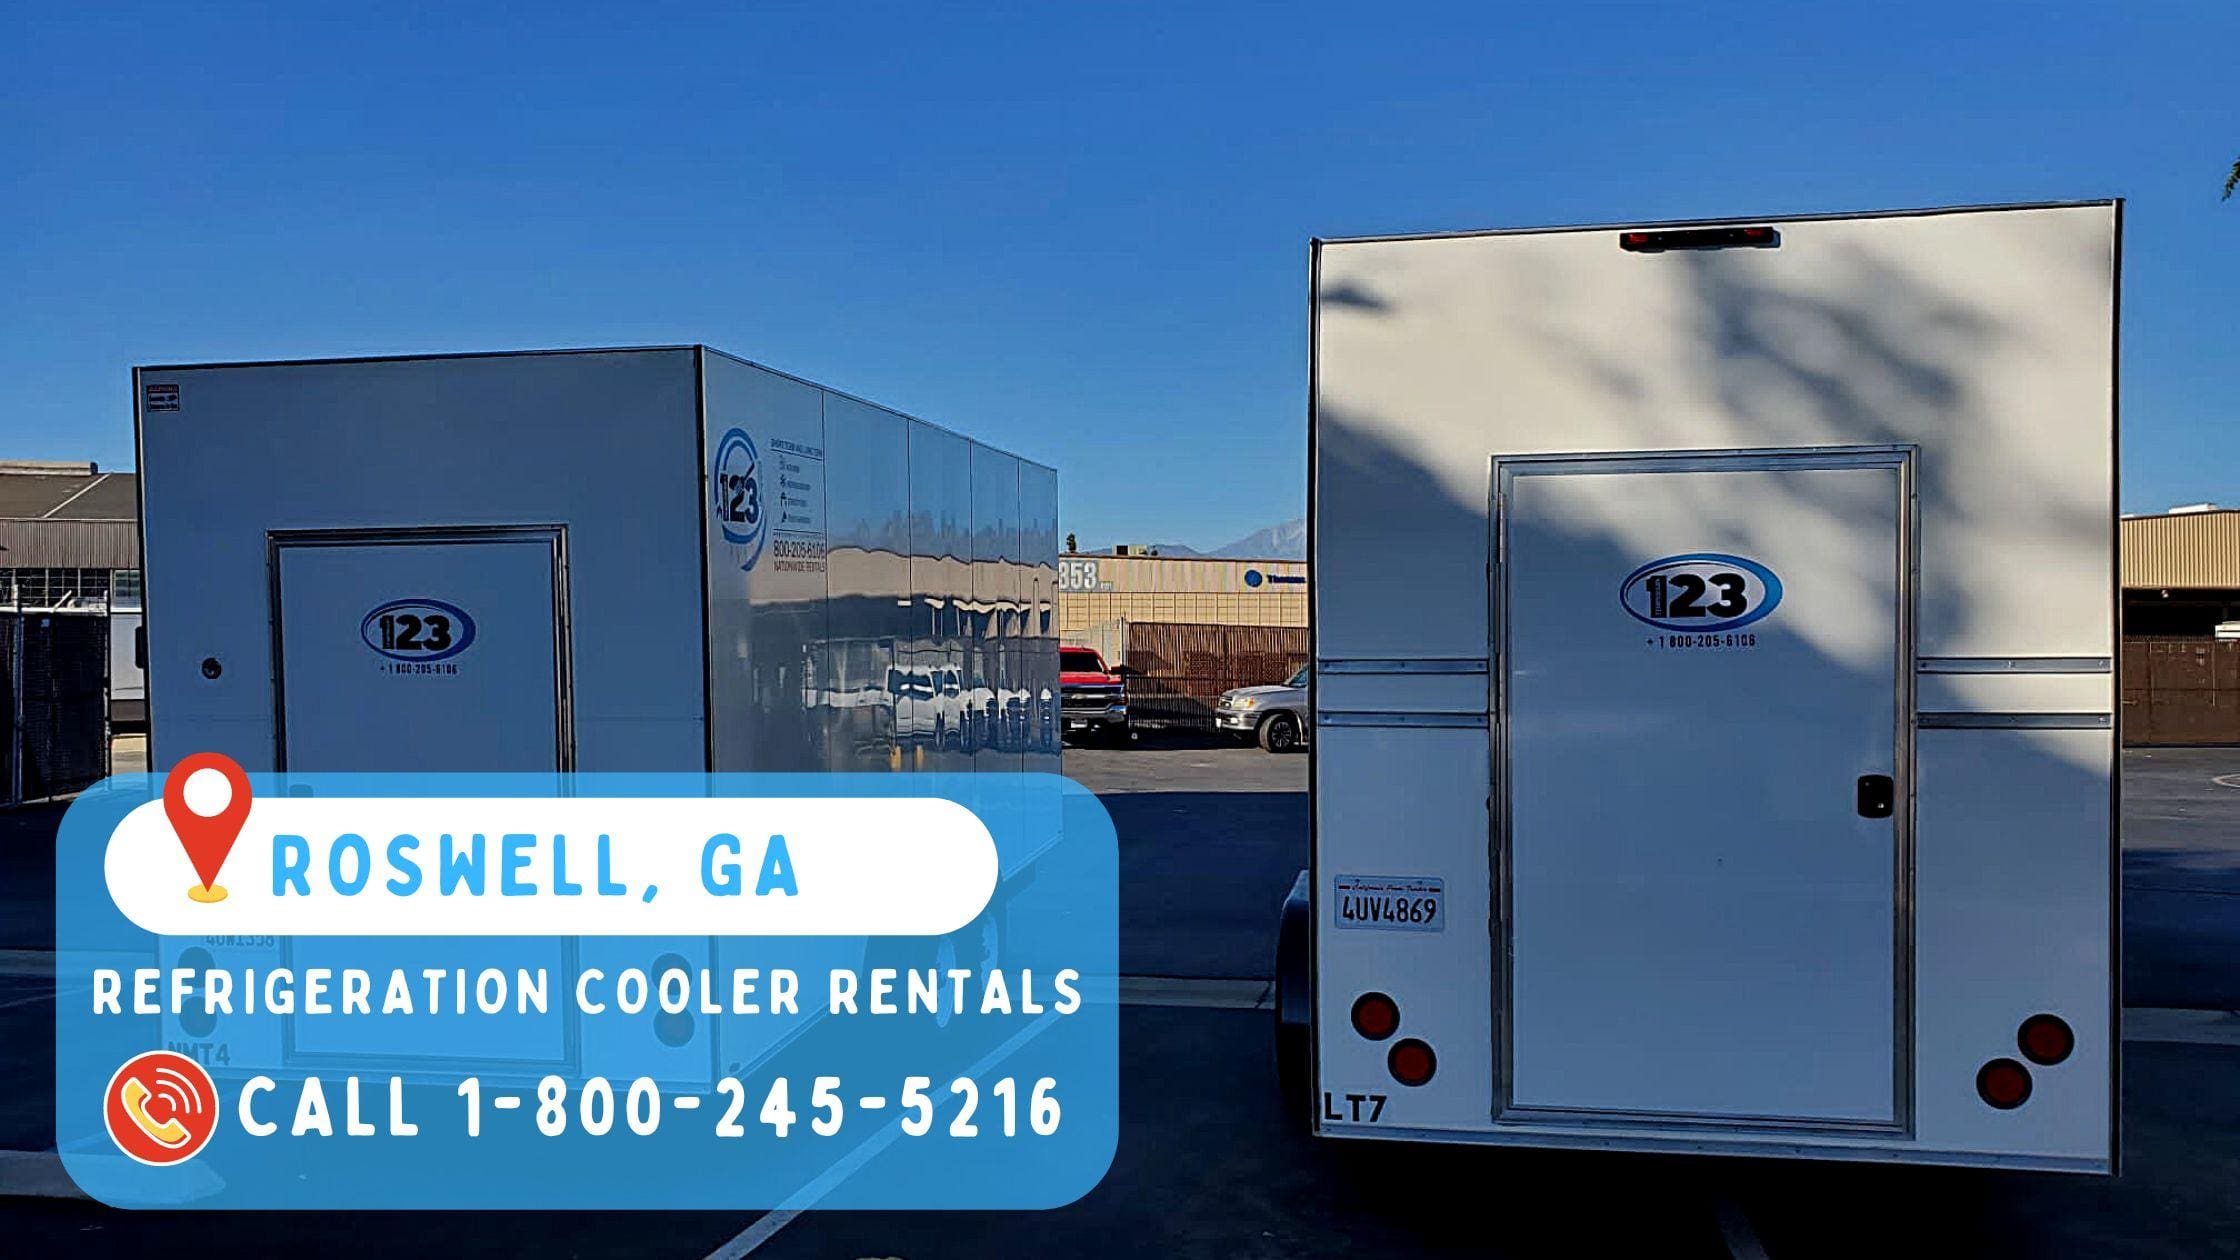 Refrigeration Cooler Rentals in Roswell